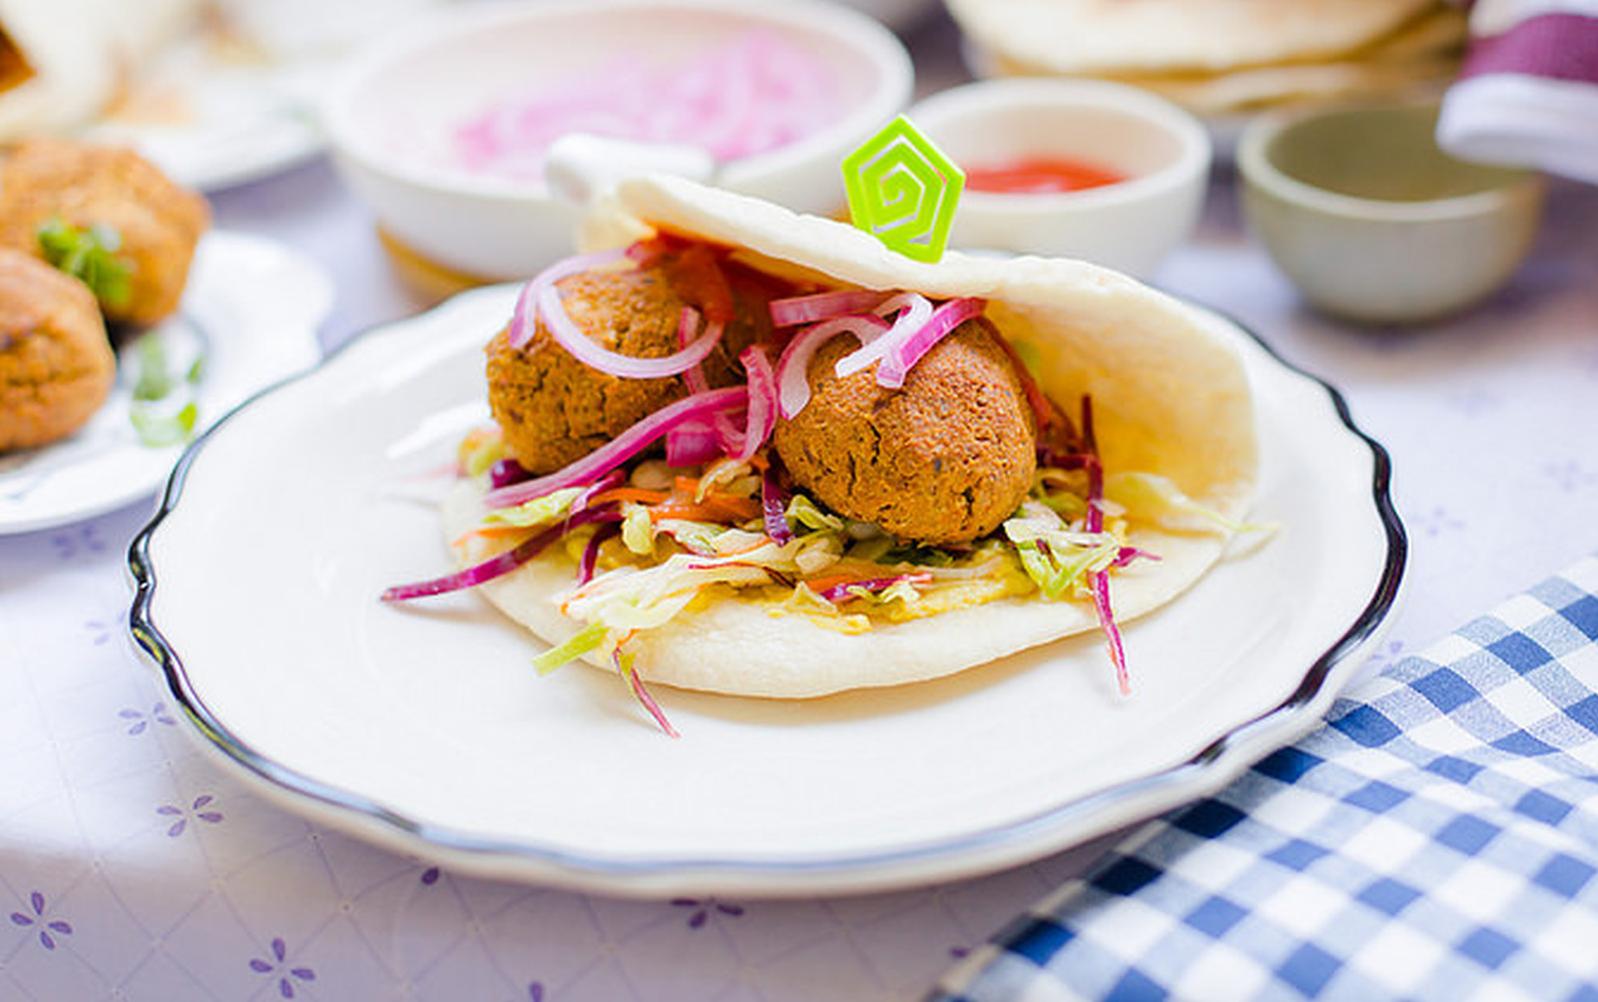  Are you craving falafel but don't want to go overboard with the carbs? Try